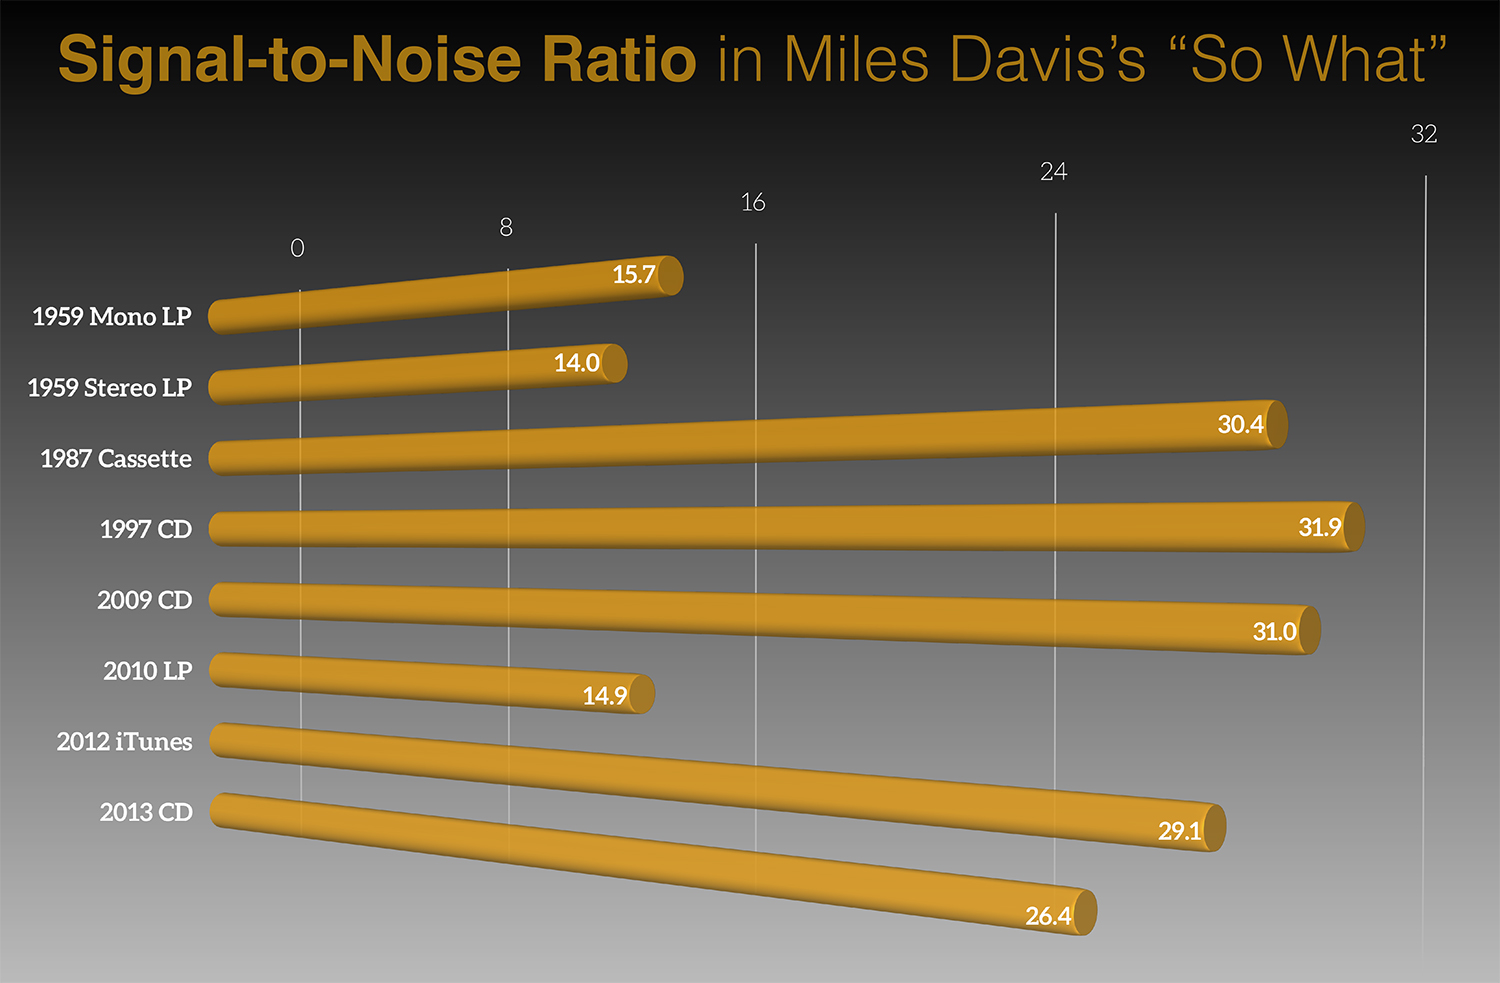 bar chart shows the signal-to-noise ration in various recordings of Miles Davis's "So What." 1959 mono lp = 15.7. 1959 stereo LP = 14. 1987 cassette = 30.4. 1997 CD = 31.9. 2009 CD = 31. 2010 LP = 14.0. 2012 iTunes = 29.1. 2013 CD = 26.4.